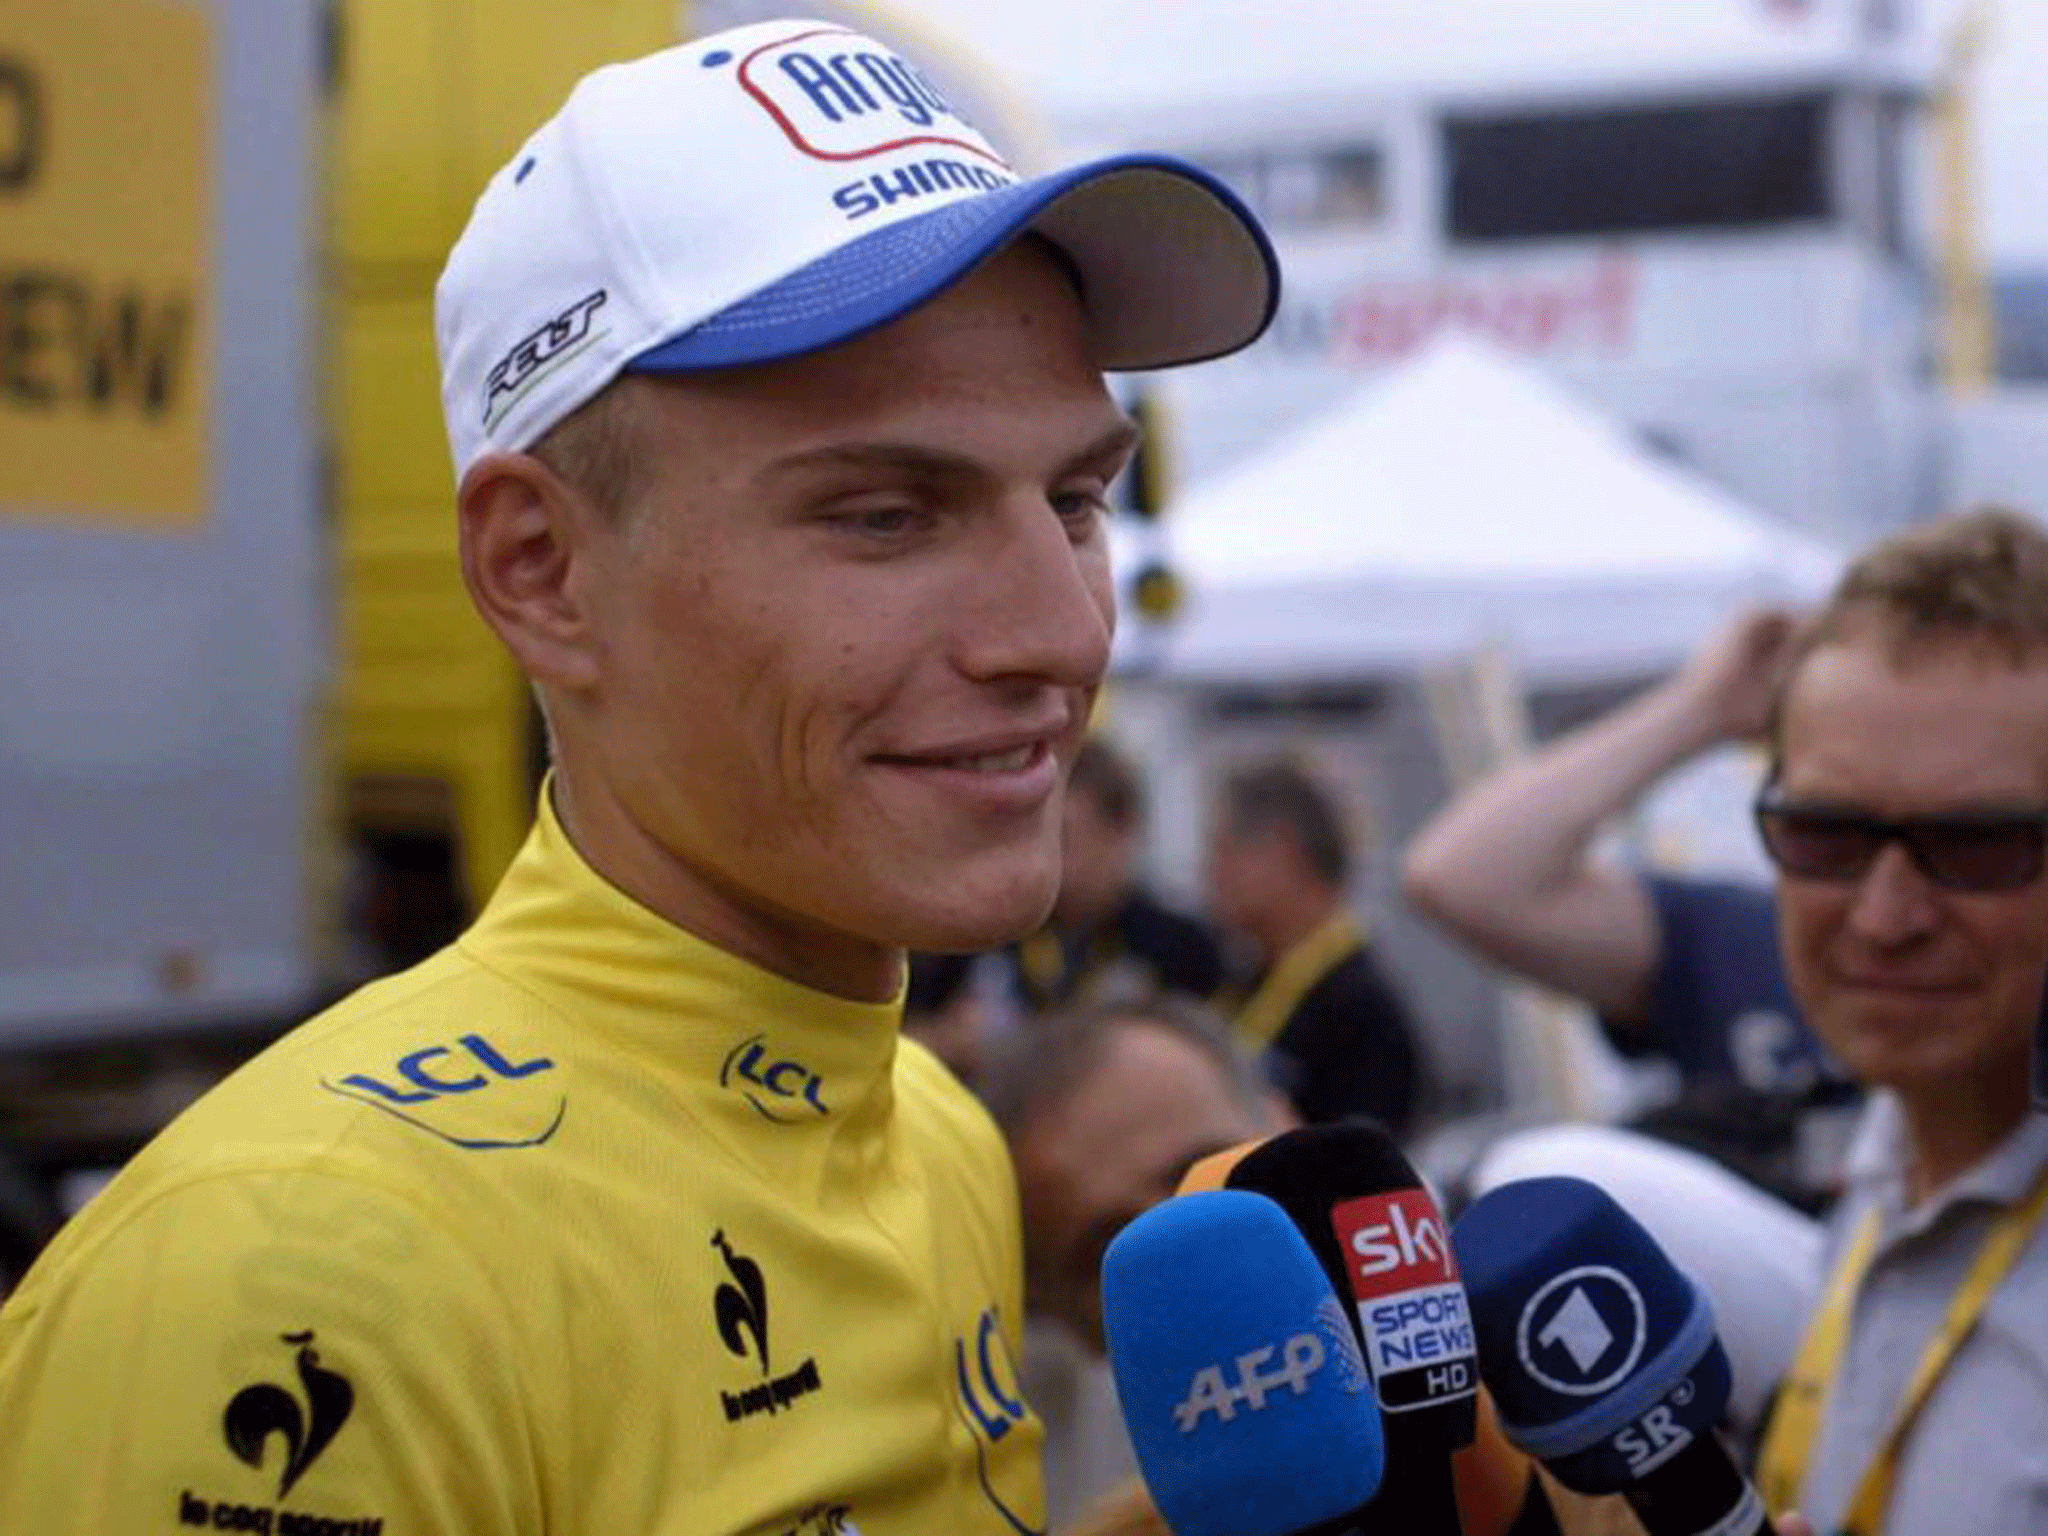 Marcel Kittel in 'Clean Spirit - In the Heart of the Tour'